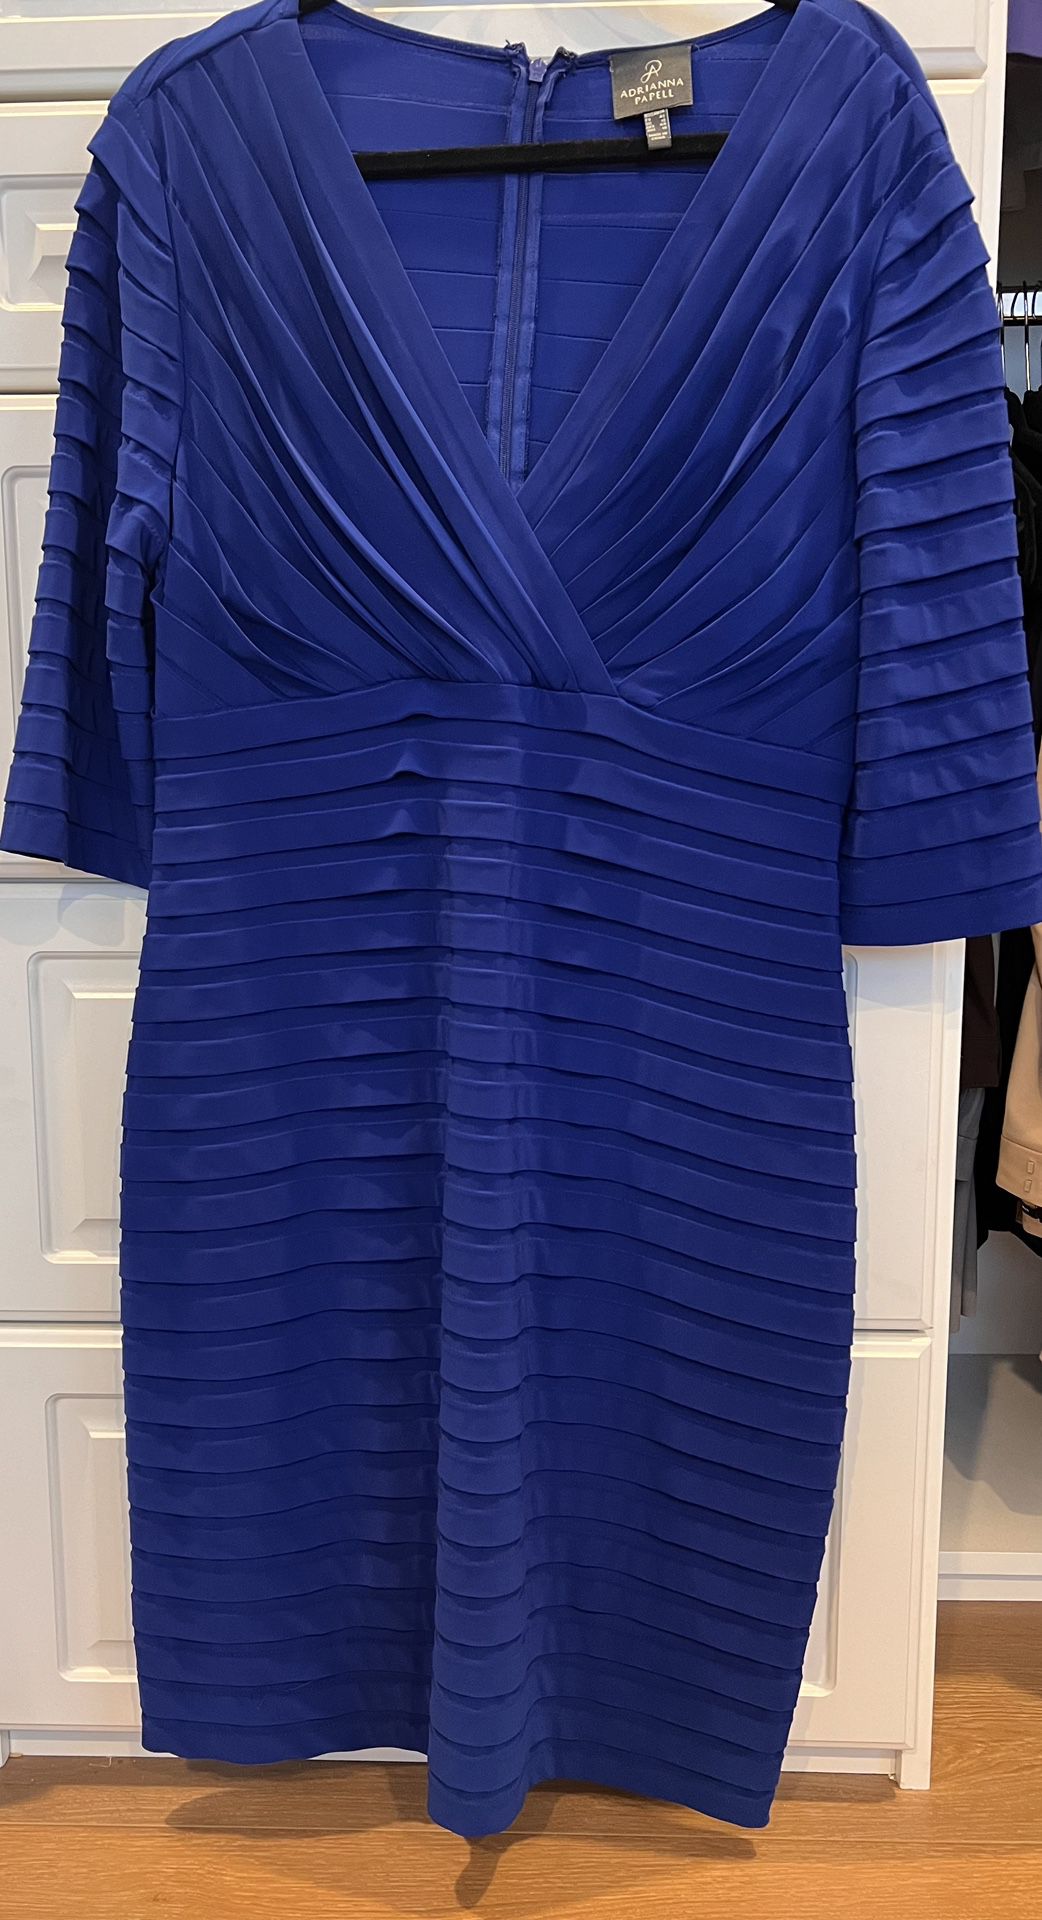 Adrianna Papell Blue Cocktail Dress 